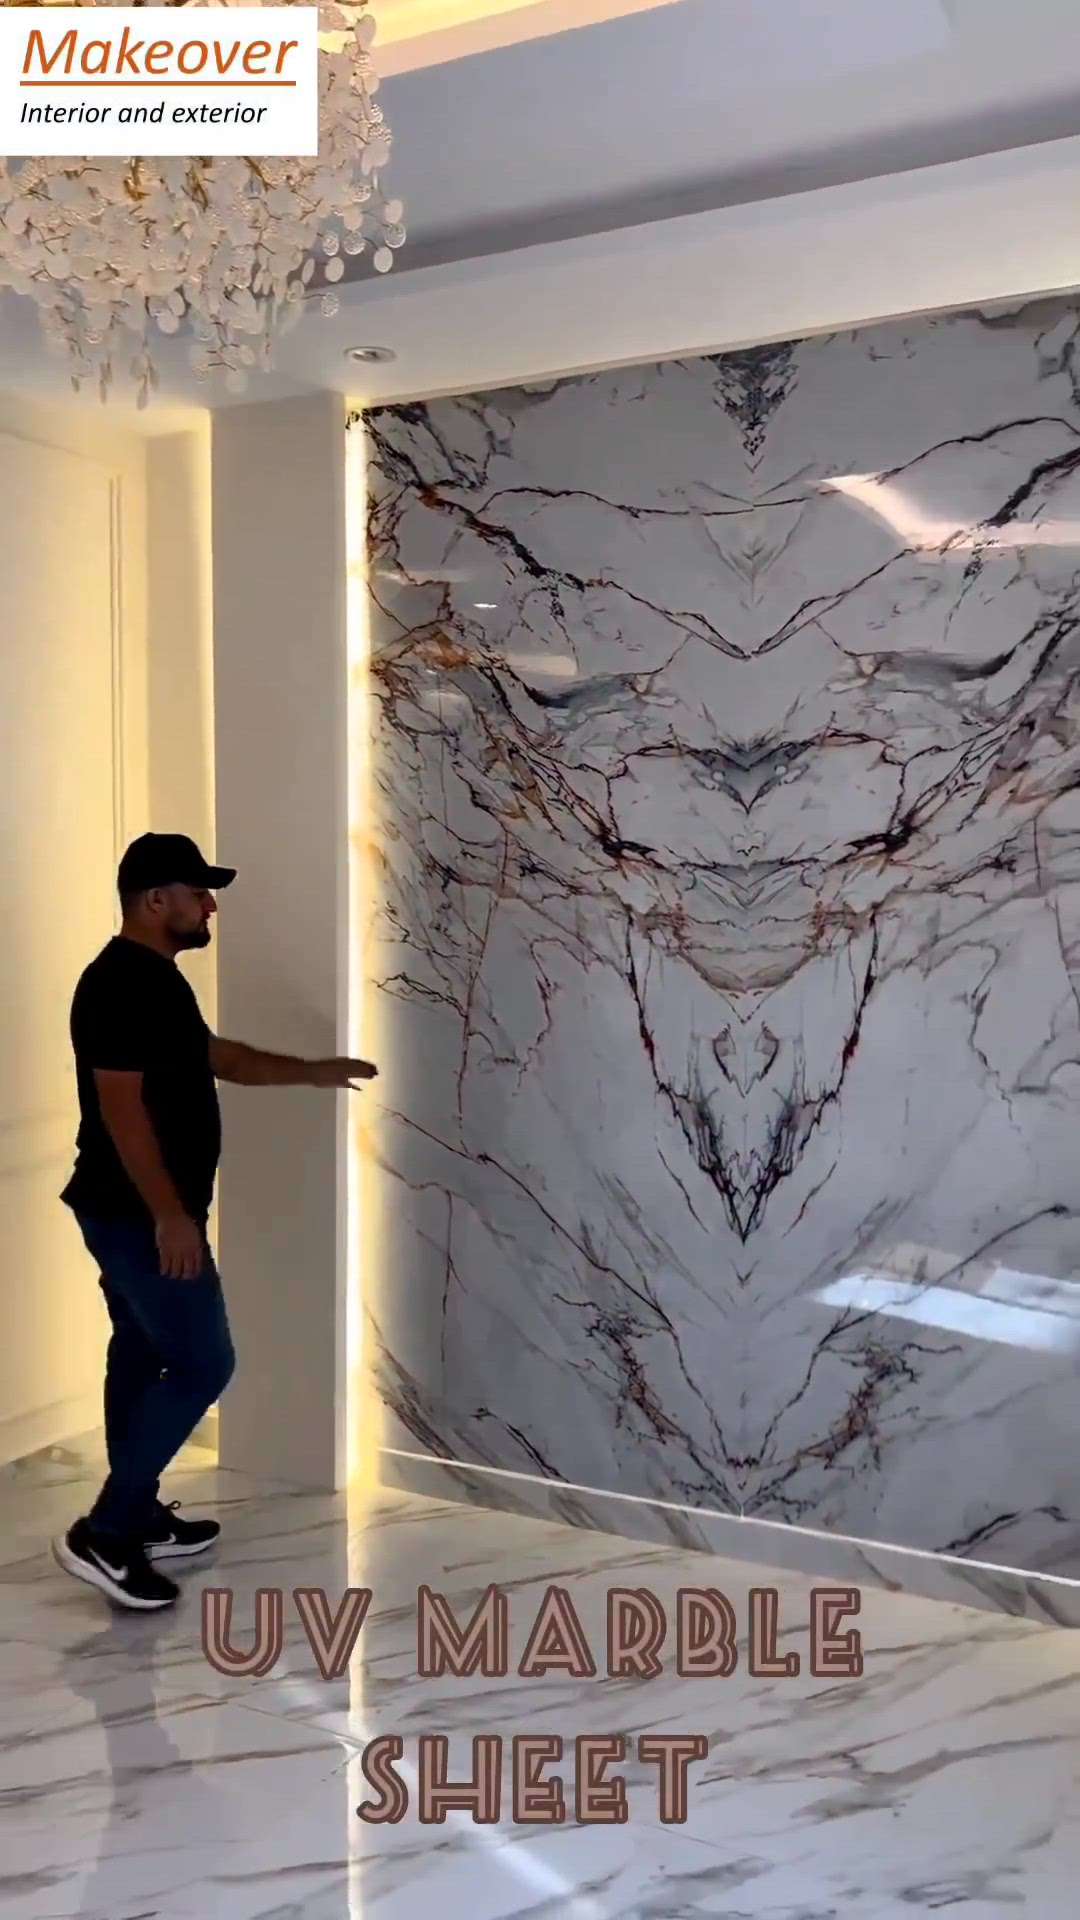 Makeover Interior Presenting you Interior Elevation product UV Marble Sheet
.
.
. 
. 
#uv  #uvmarblesheet    #Interior #elevation #exteriorelevation  #modernexterior #louvers #modernelevation #makeoverinterior
. 
. 
Stay connected for more information
. 
. 
Or call us on 
7428109696
9311780628